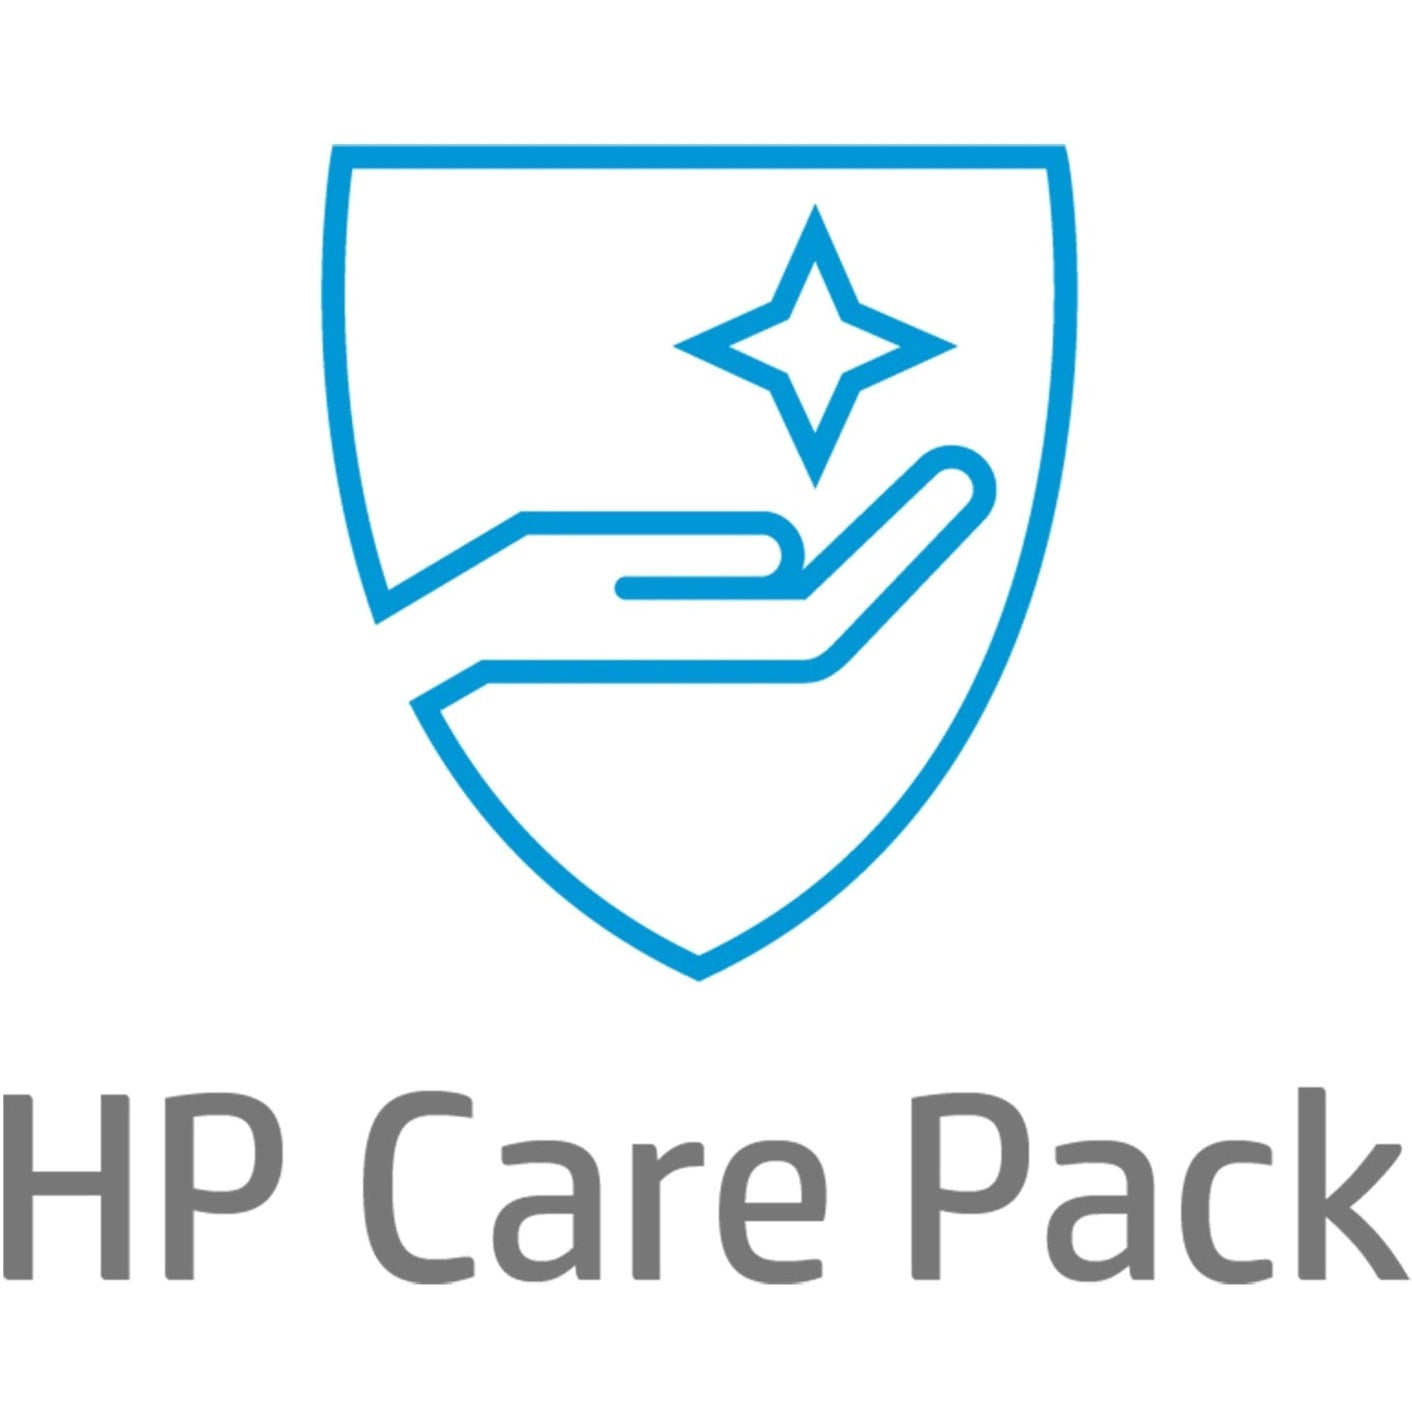 HP Care Pack - 4 Year - Warranty (UE336E)